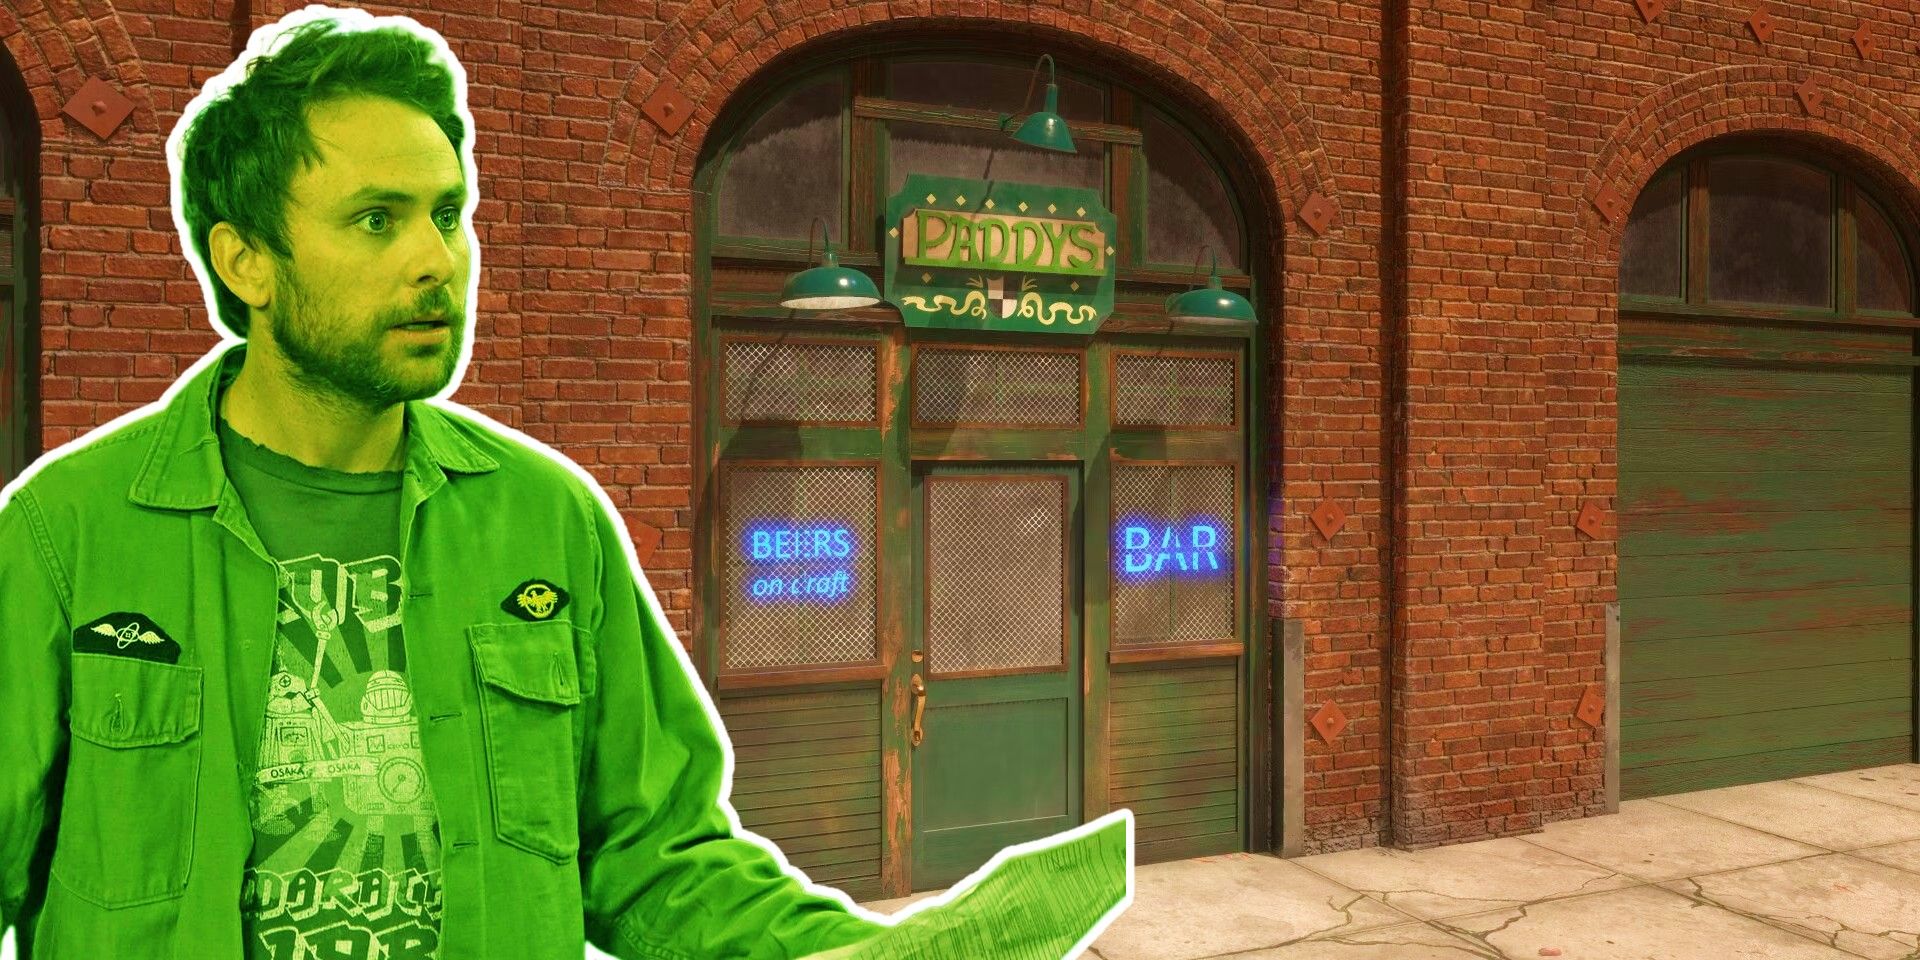 Custom image of Charlie Kelly and the exterior of Paddy's Pub in It's Always Sunny in Philadelphia